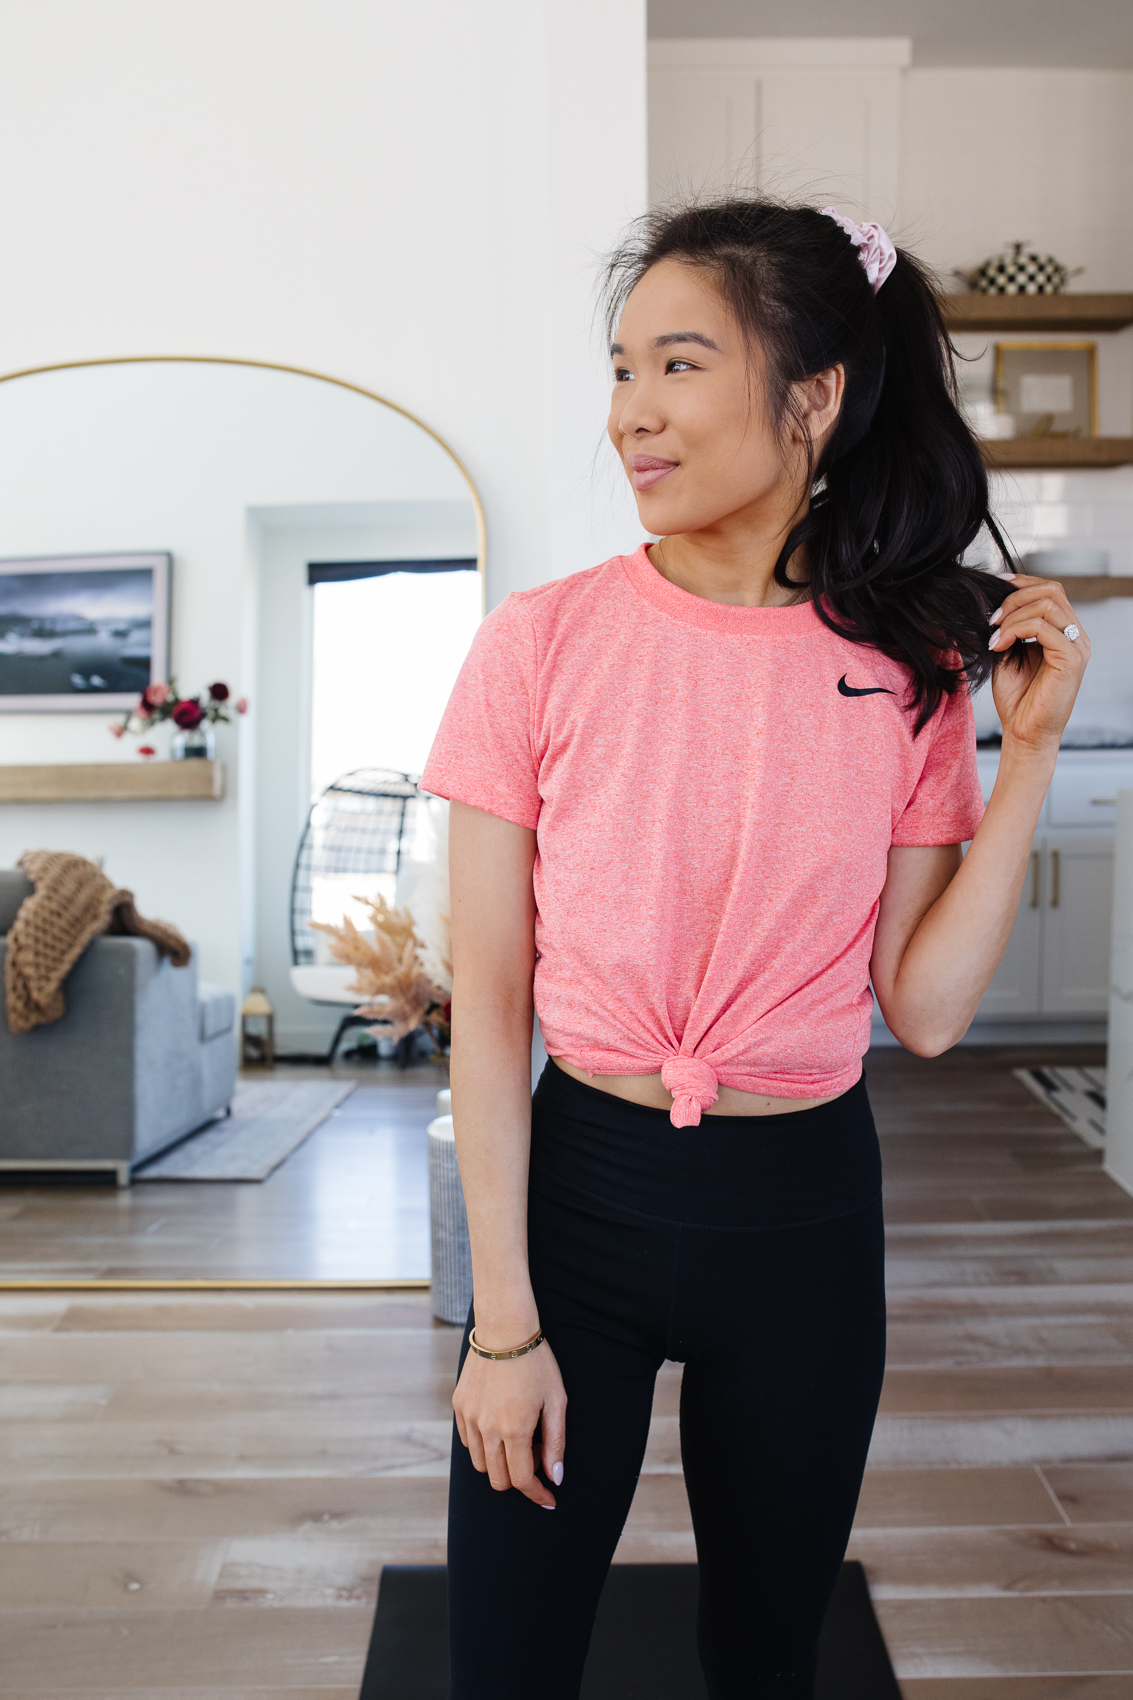 Blogger Hoang-Kim wearing Nike One Lux leggings, dri-fit t-shirt and Nike renew sneakers for an at home workout in her Dallas home